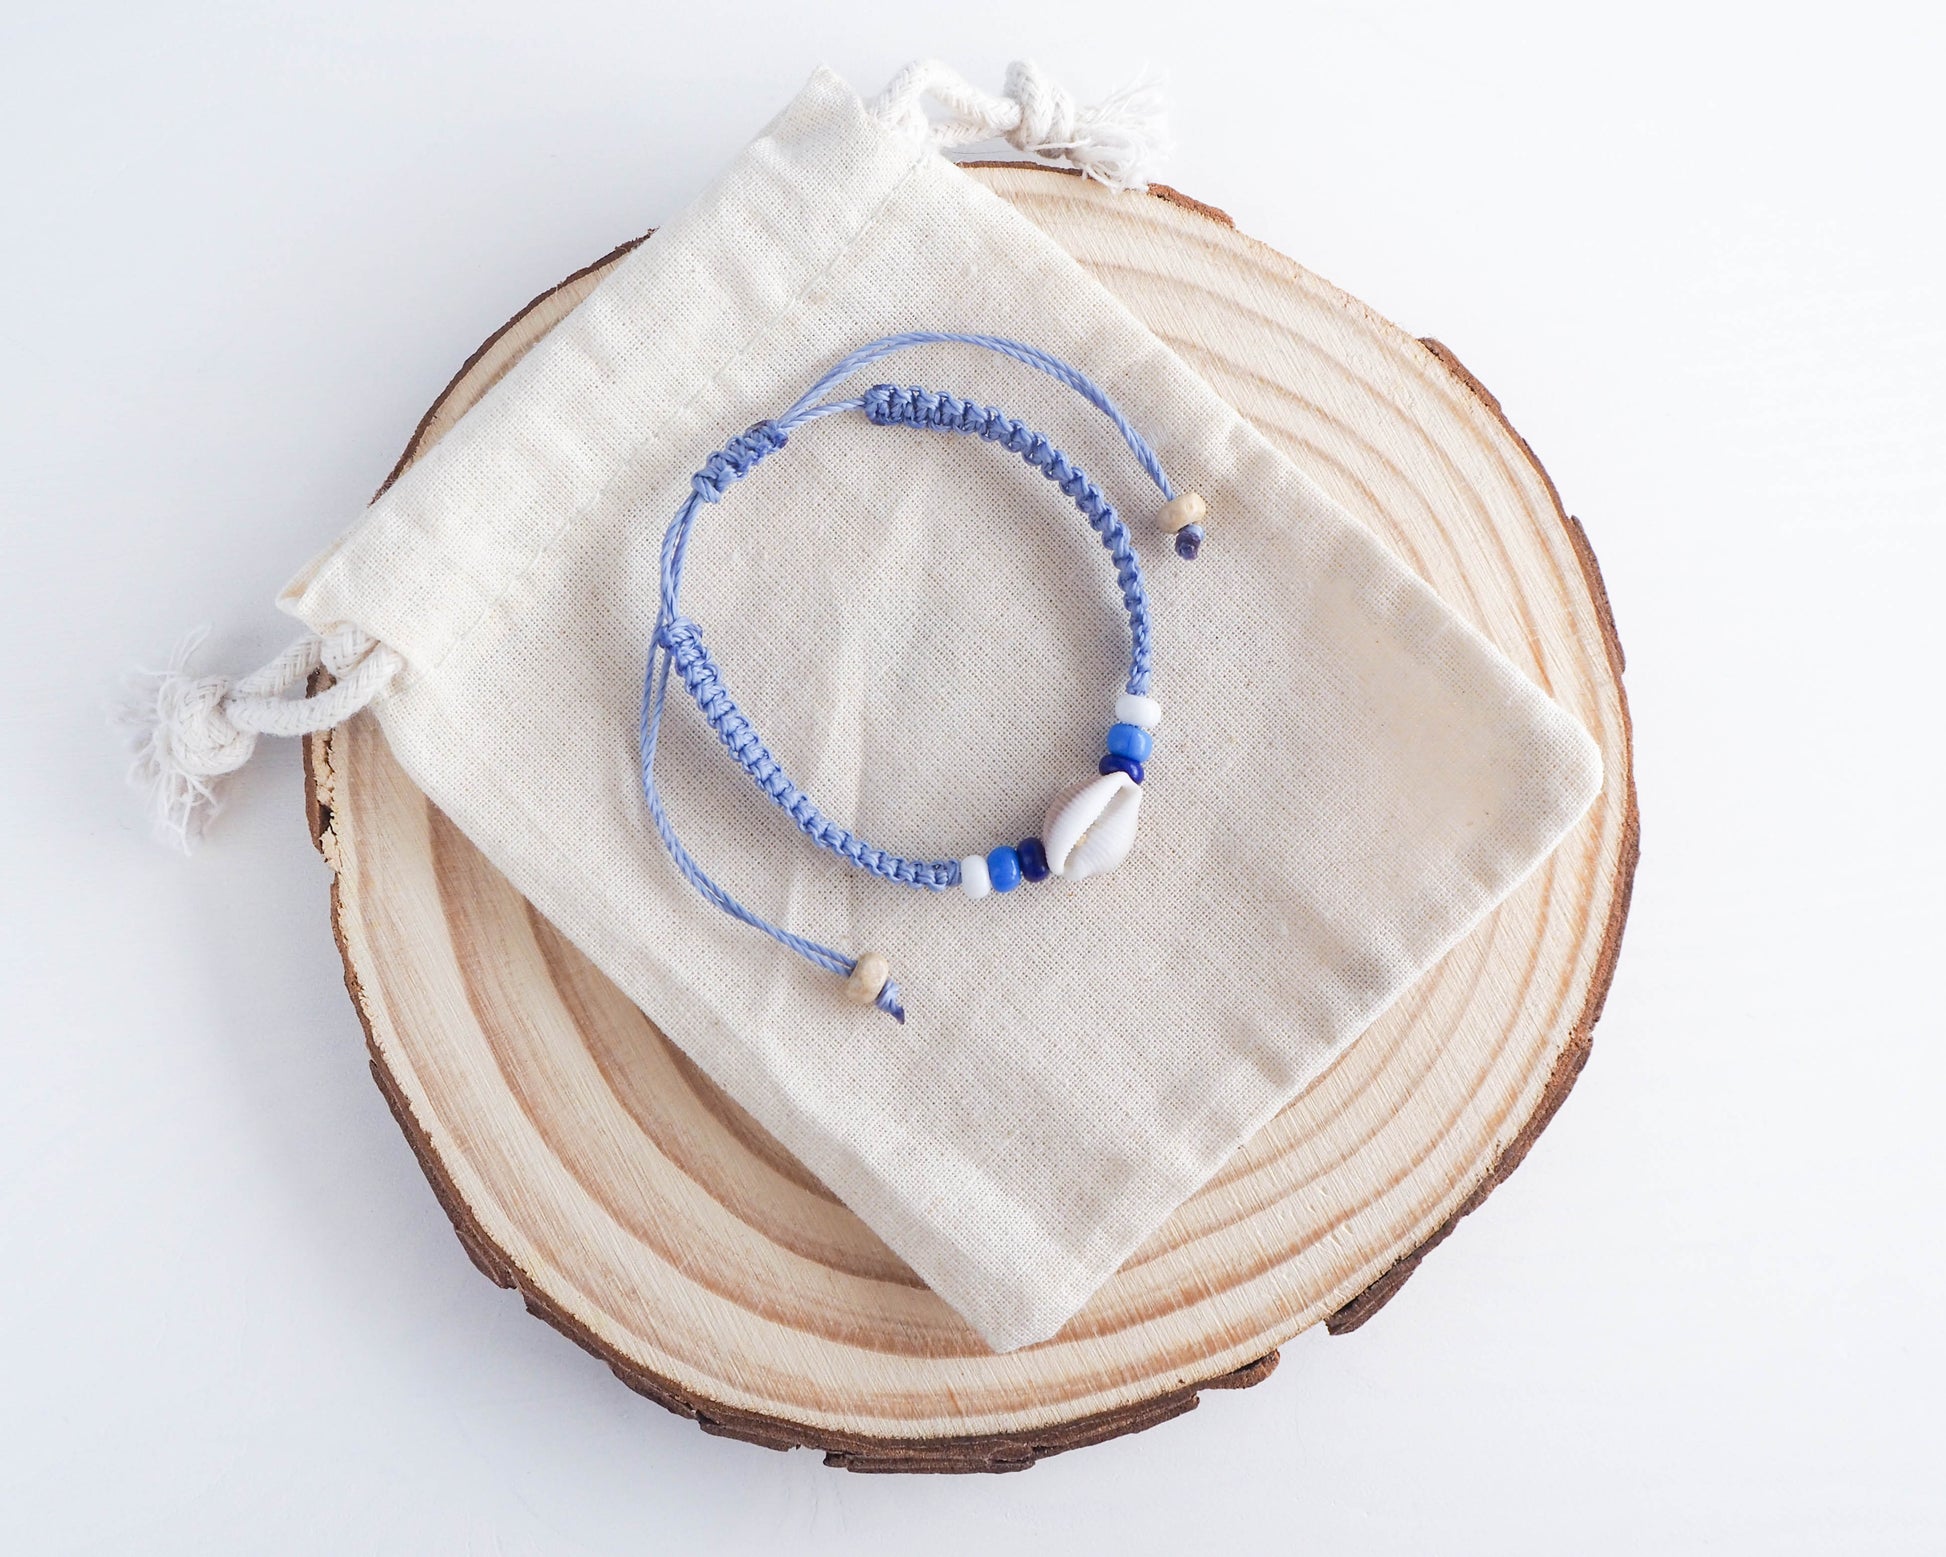 Handcrafted Bracelet with Portuguese Cowrie Shells and Blue Braided Cord